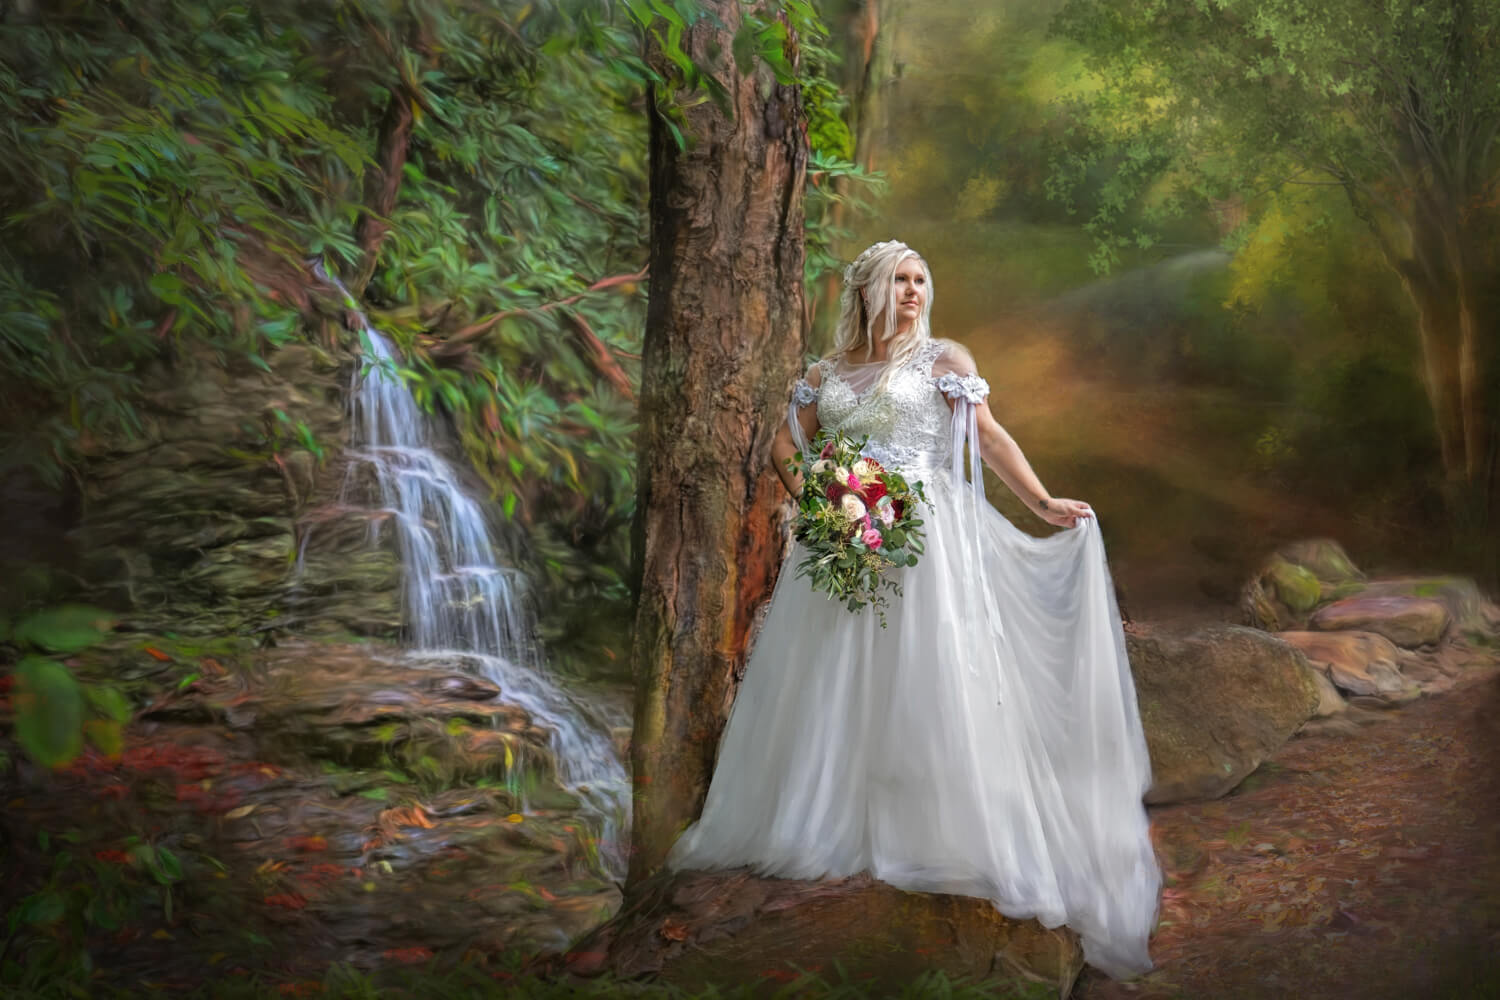 Painted Portrait of a bride by a Smoky Mountain Waterfall